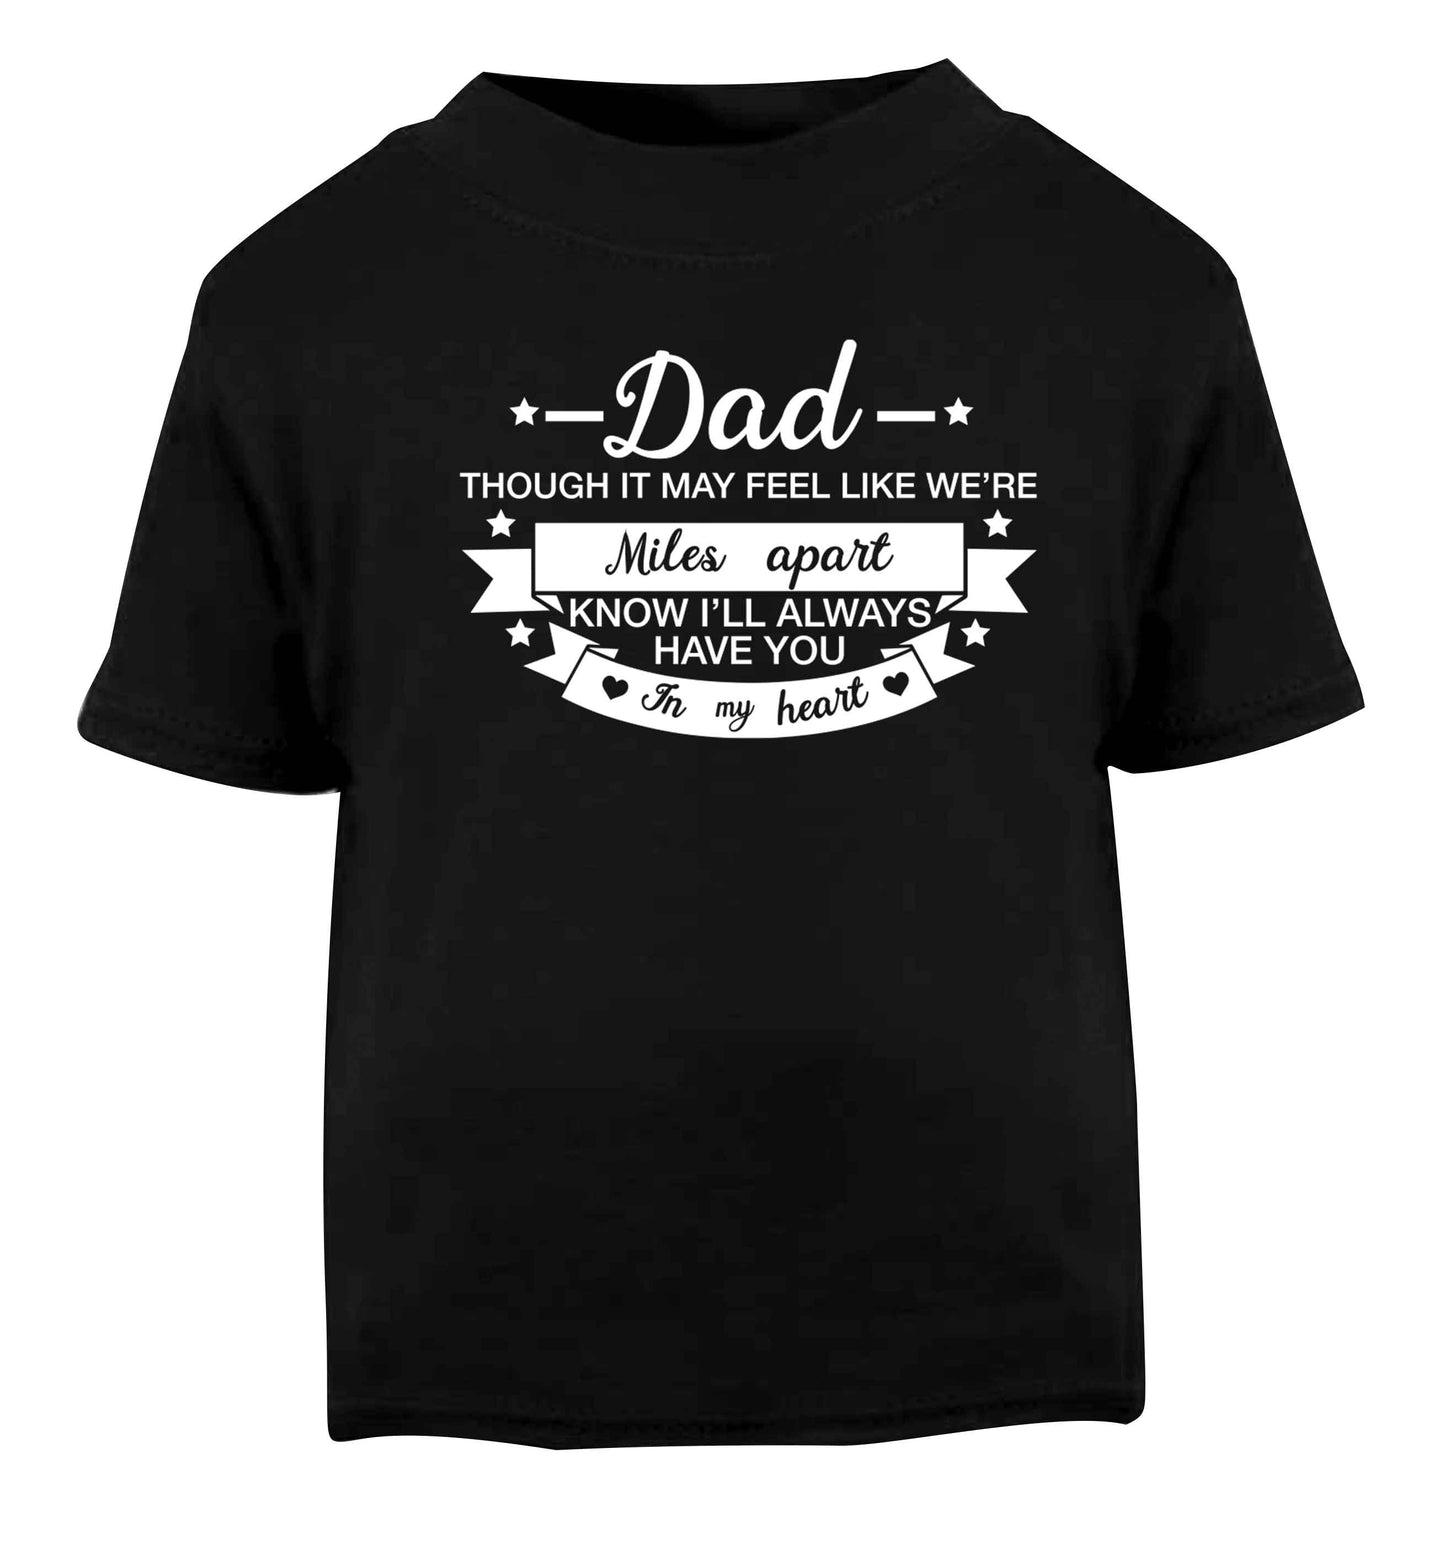 Dad though it may feel like we're miles apart know I'll always have you in my heart Black baby toddler Tshirt 2 years